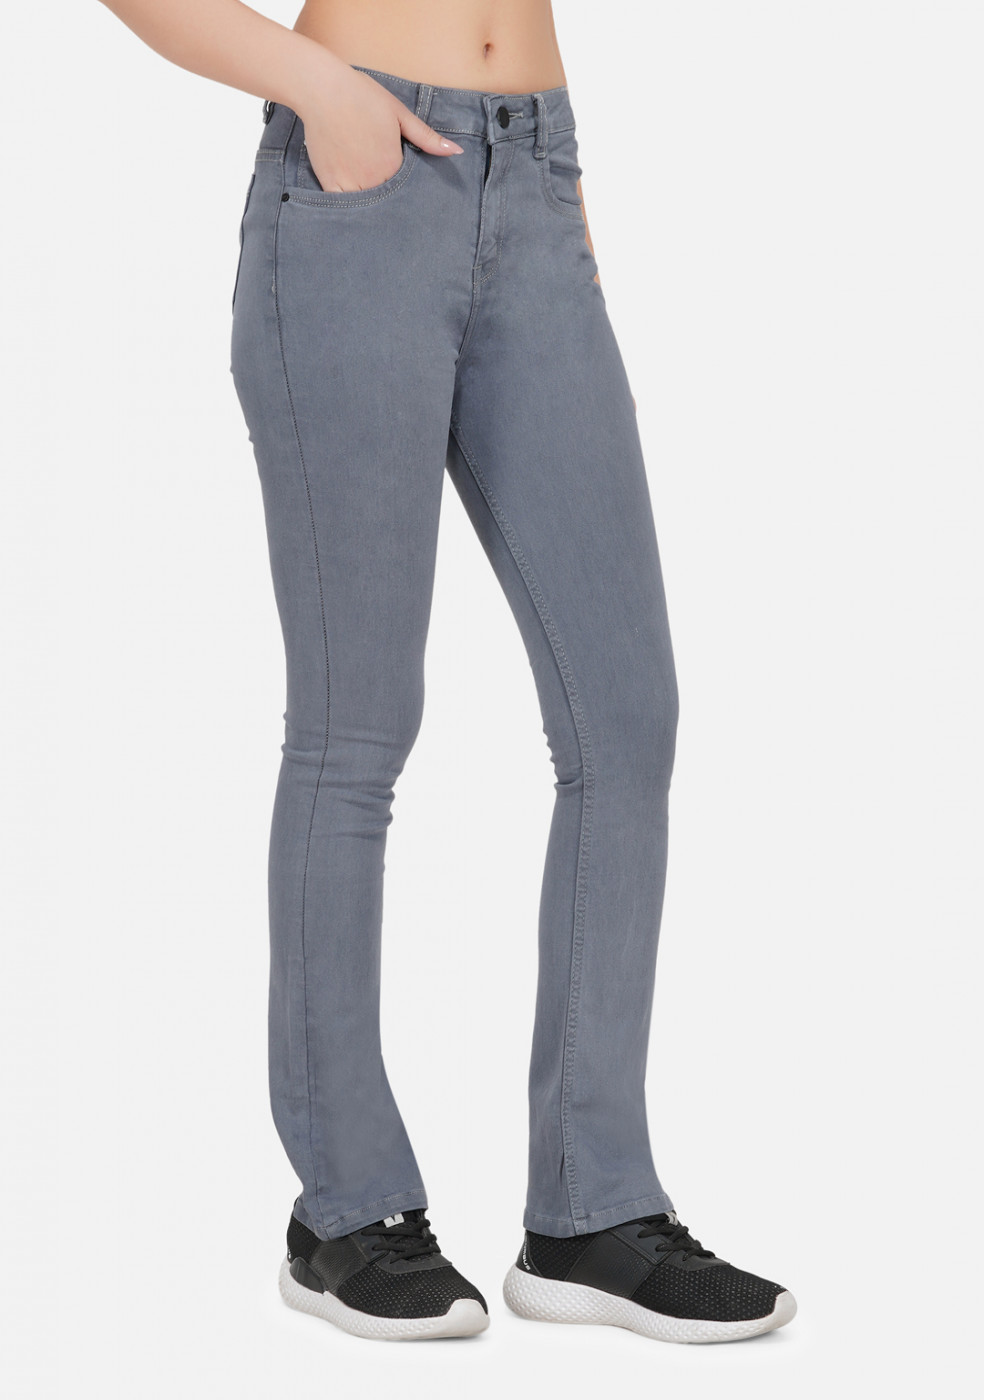 Stretchable Cotton Gray Color Jeans For Women